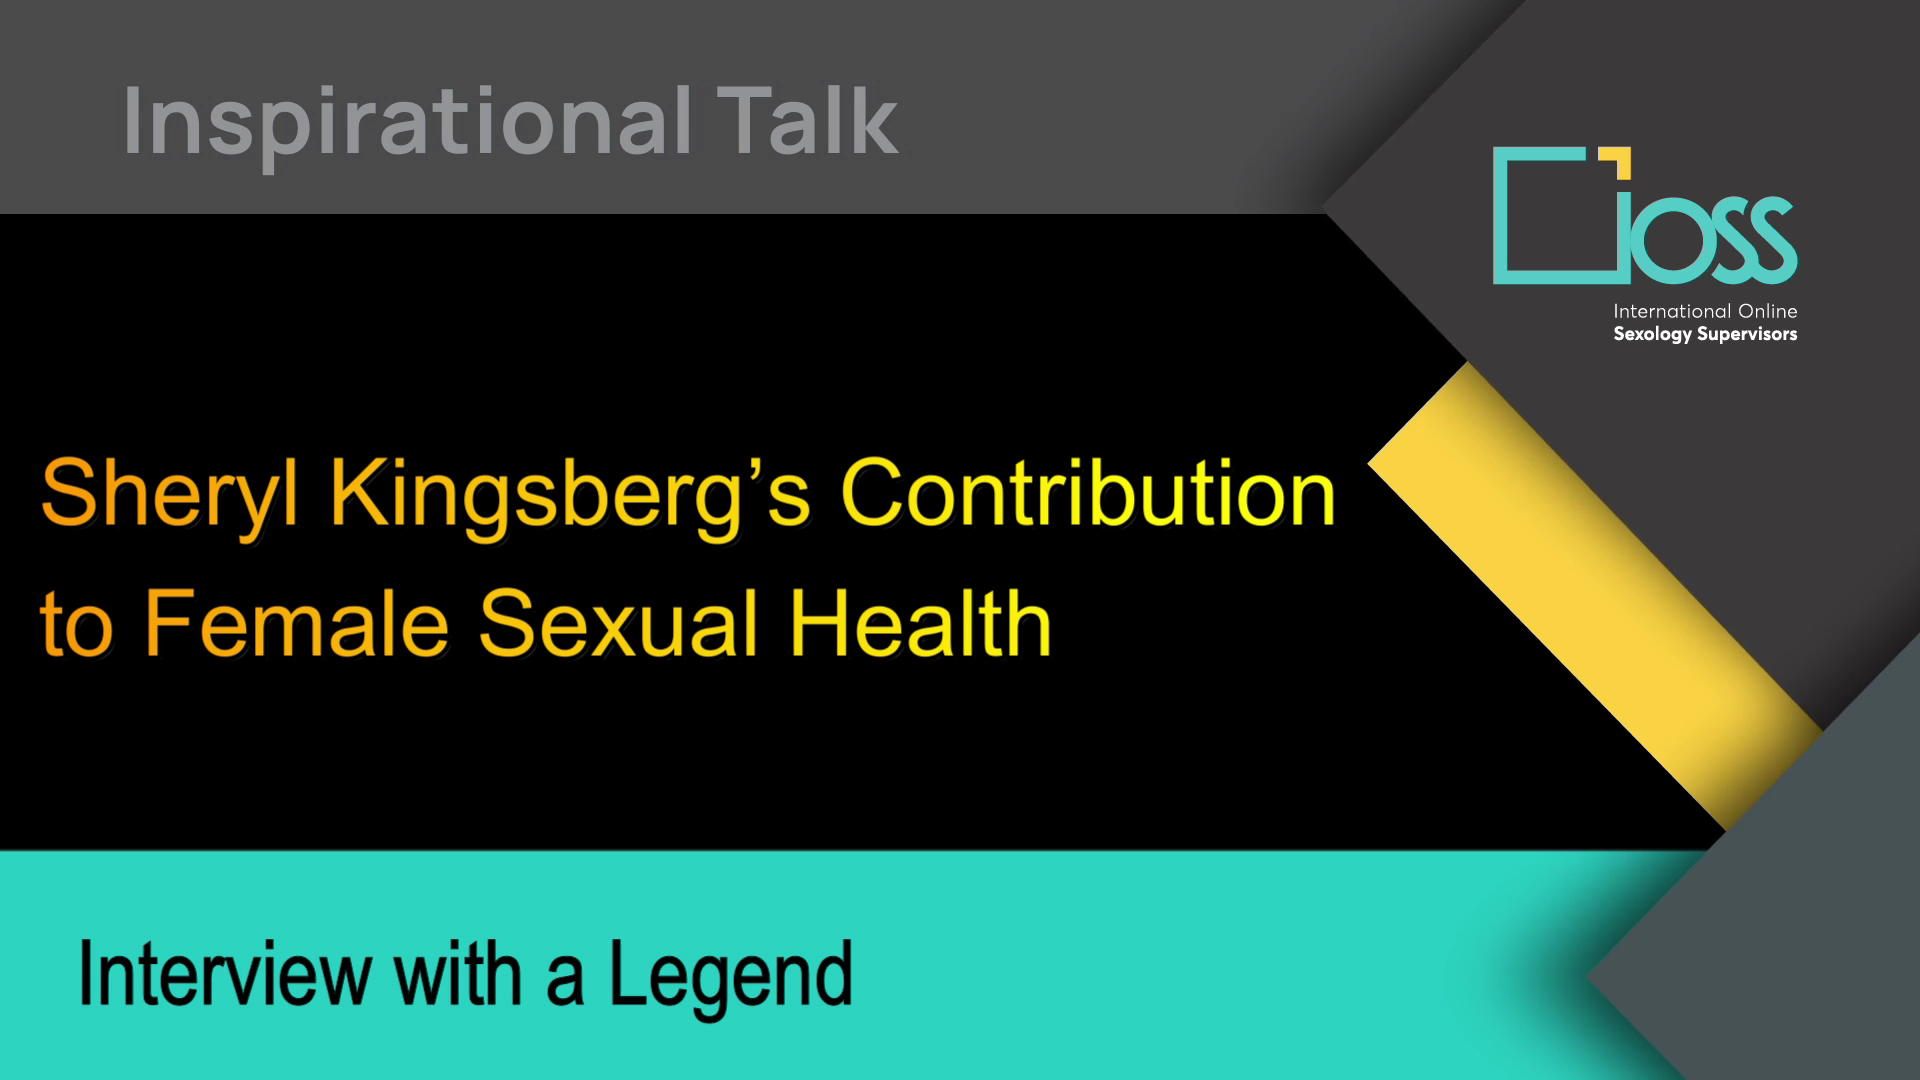 Sheryl Kingsberg’s Contribution to Female Sexual Health